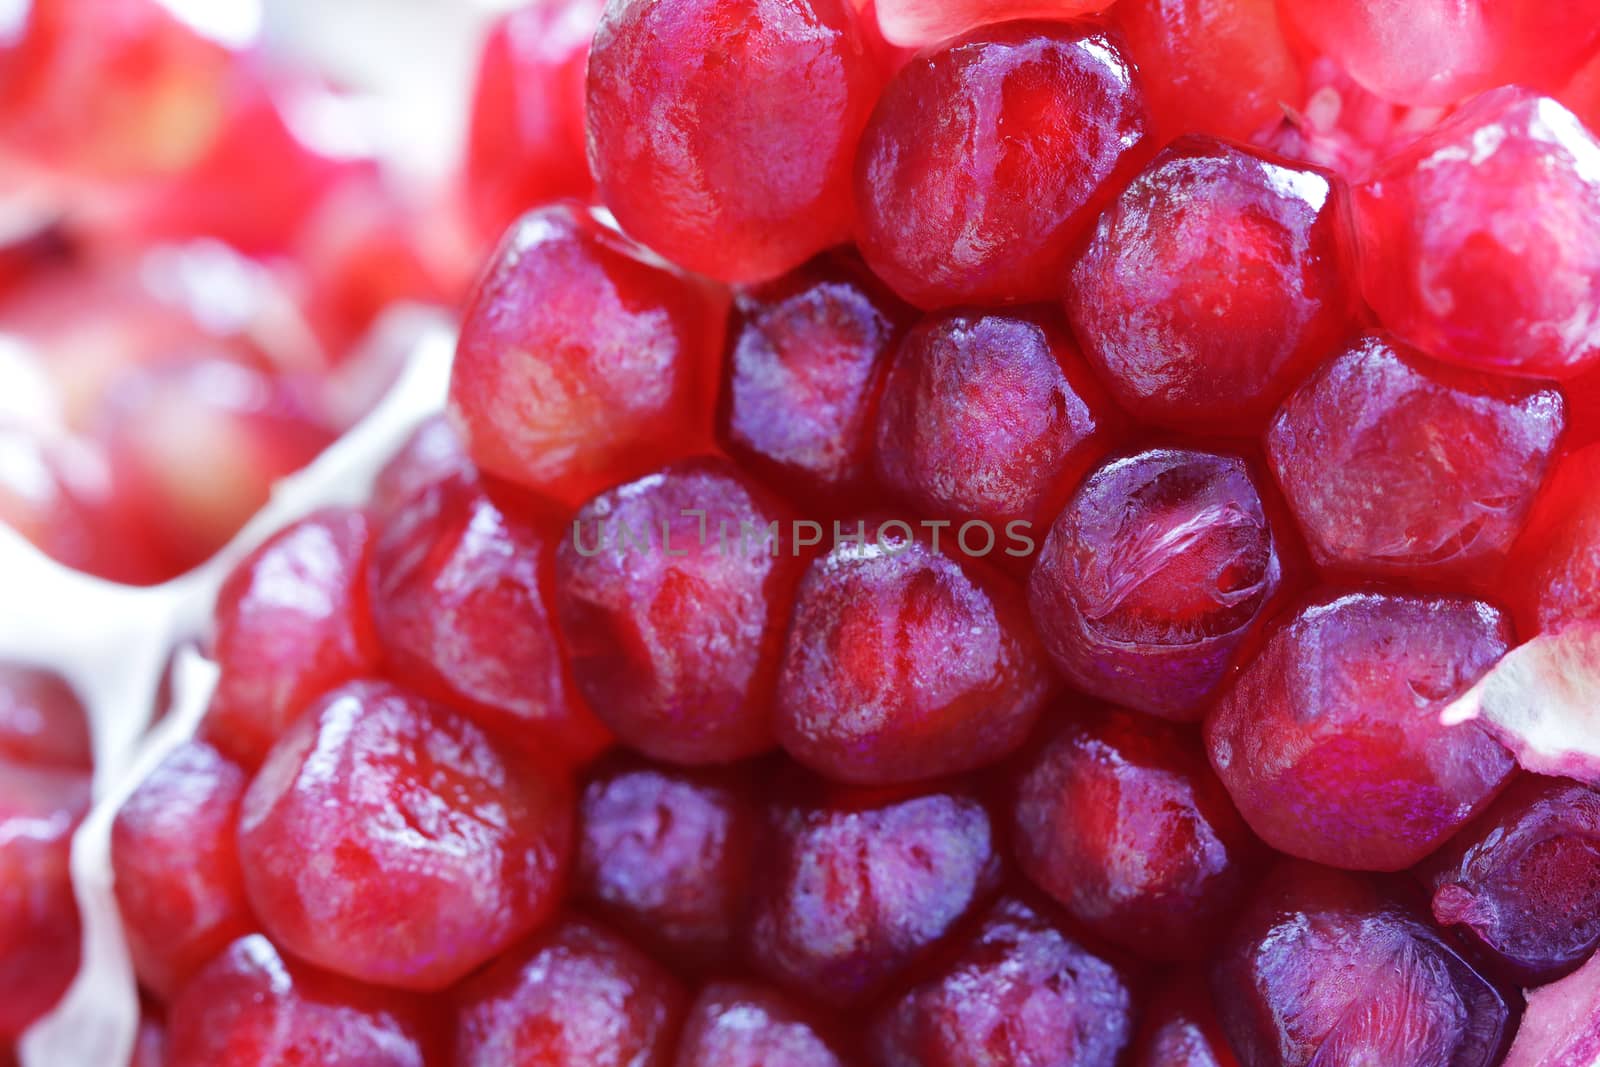 Pomegranate red fruit beautiful close up photo by Voinakh